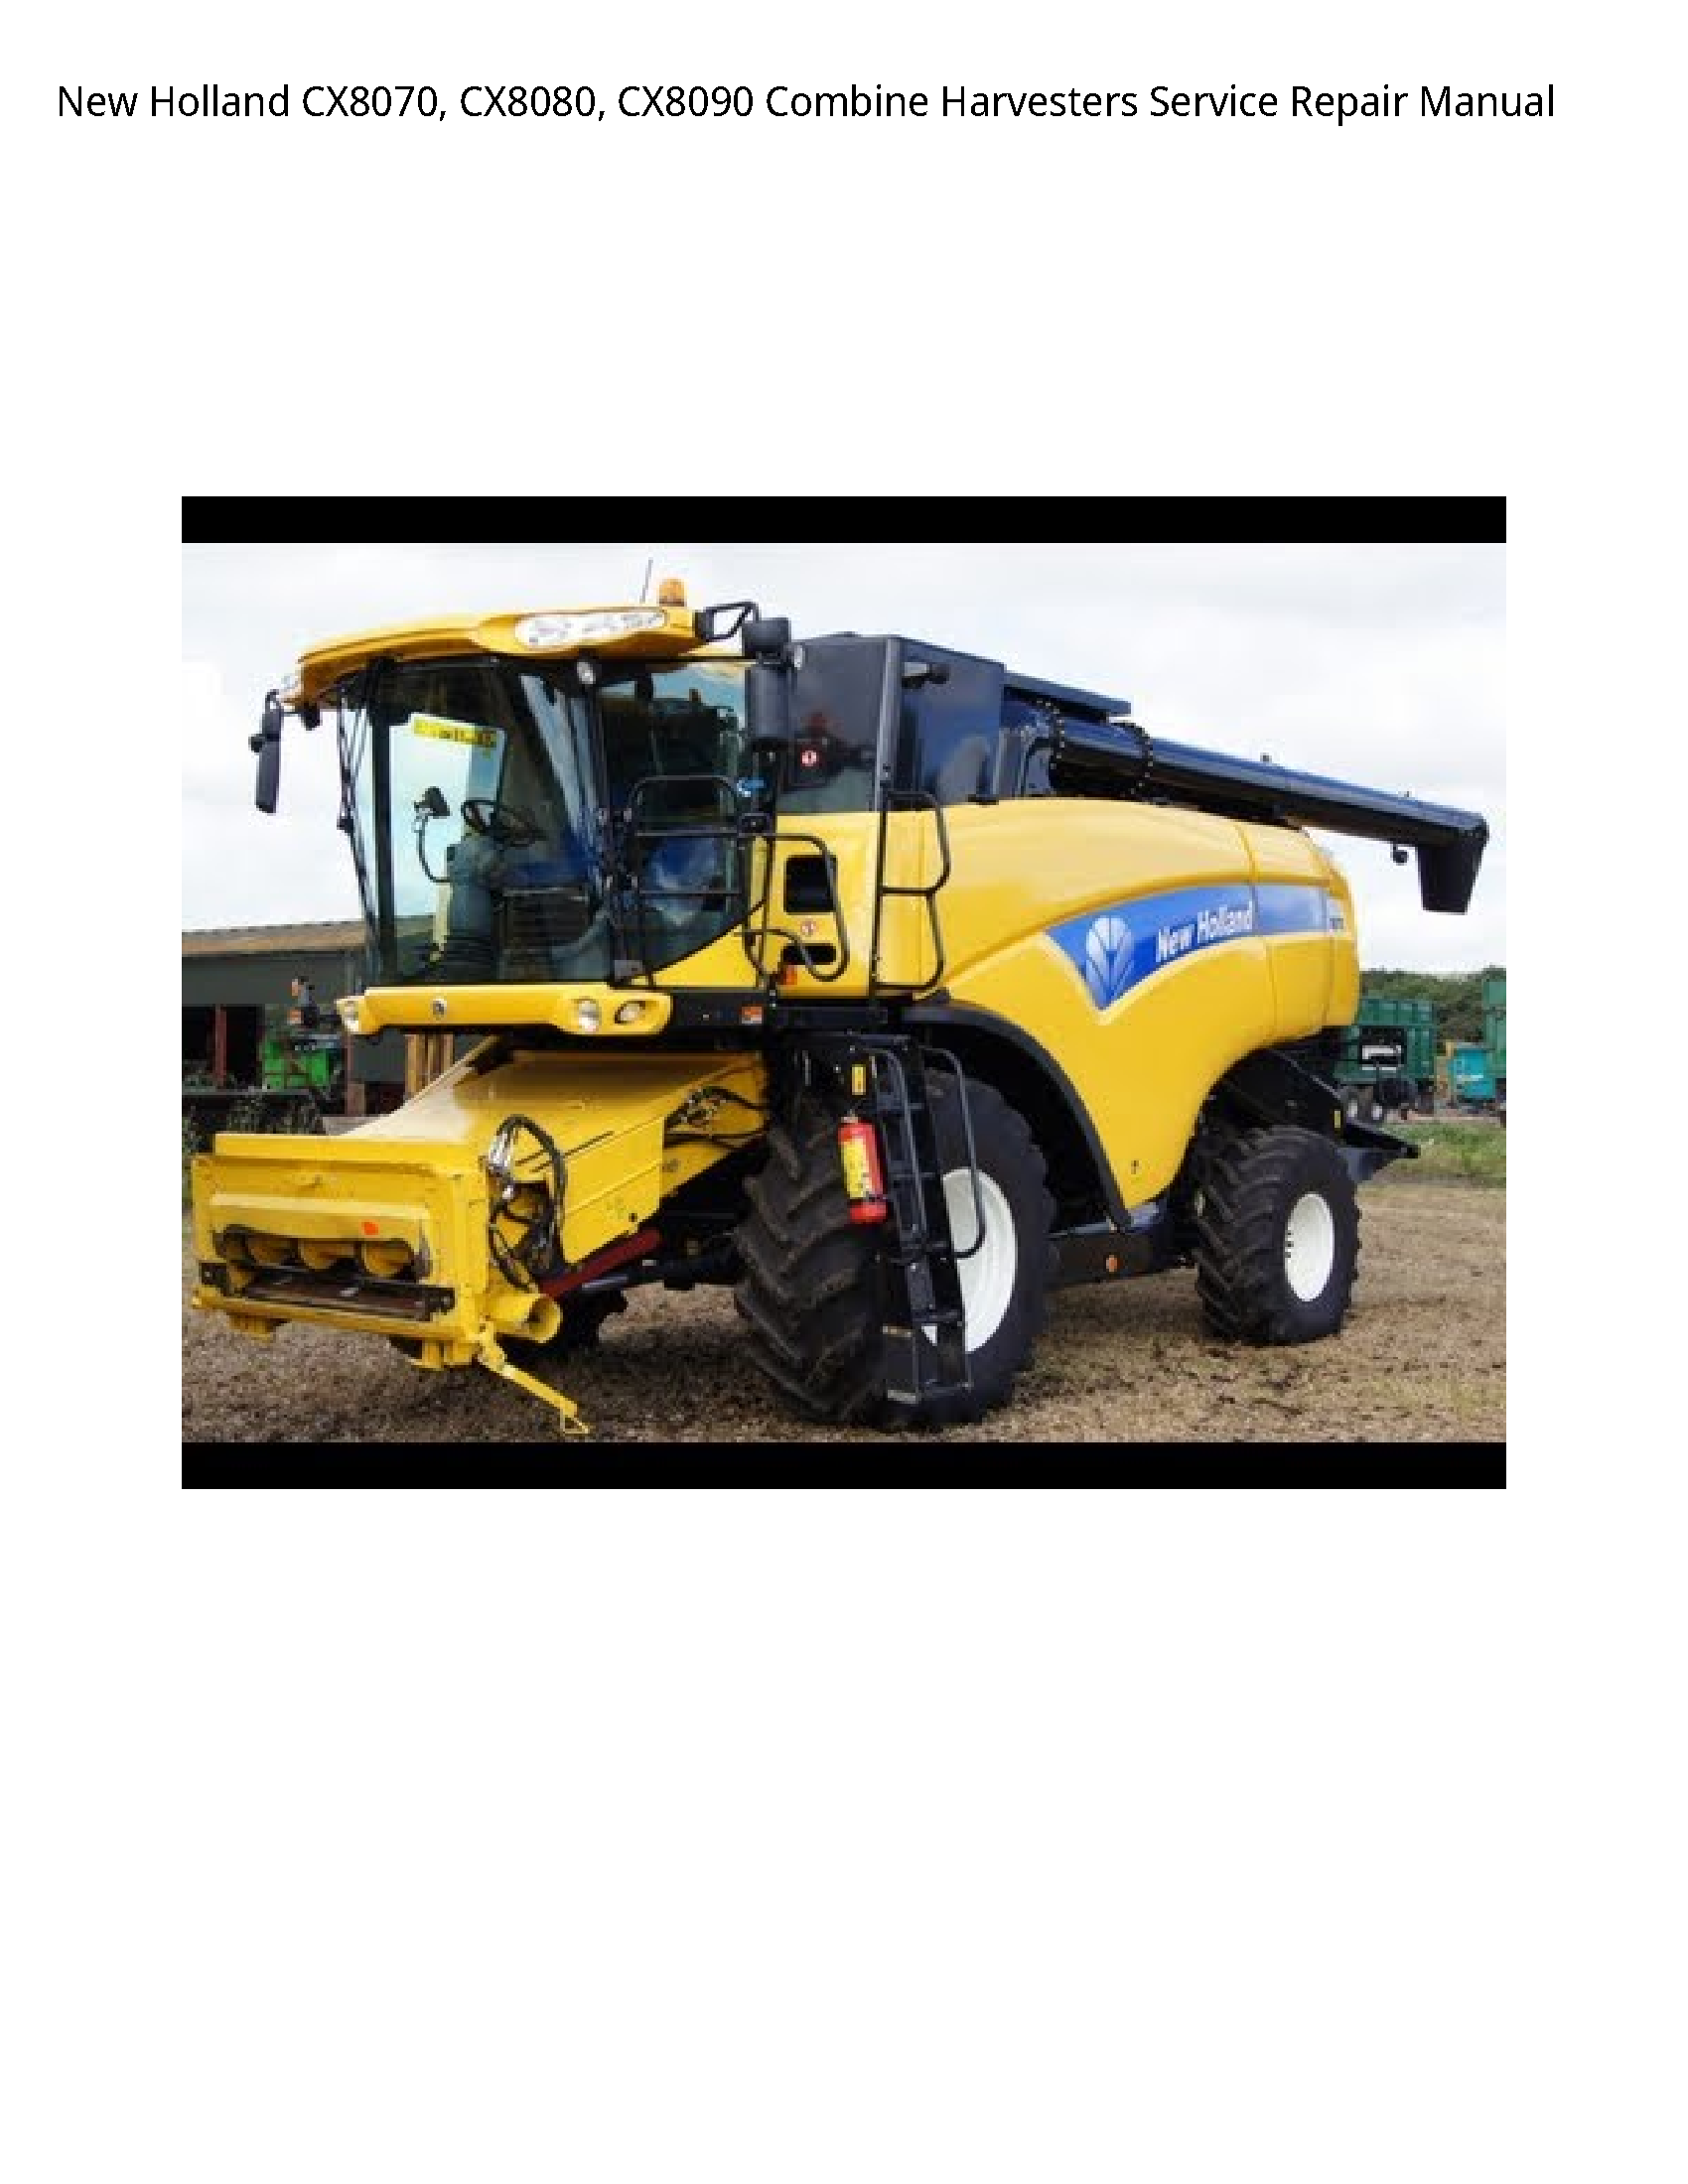 New Holland CX8070 Combine Harvesters manual